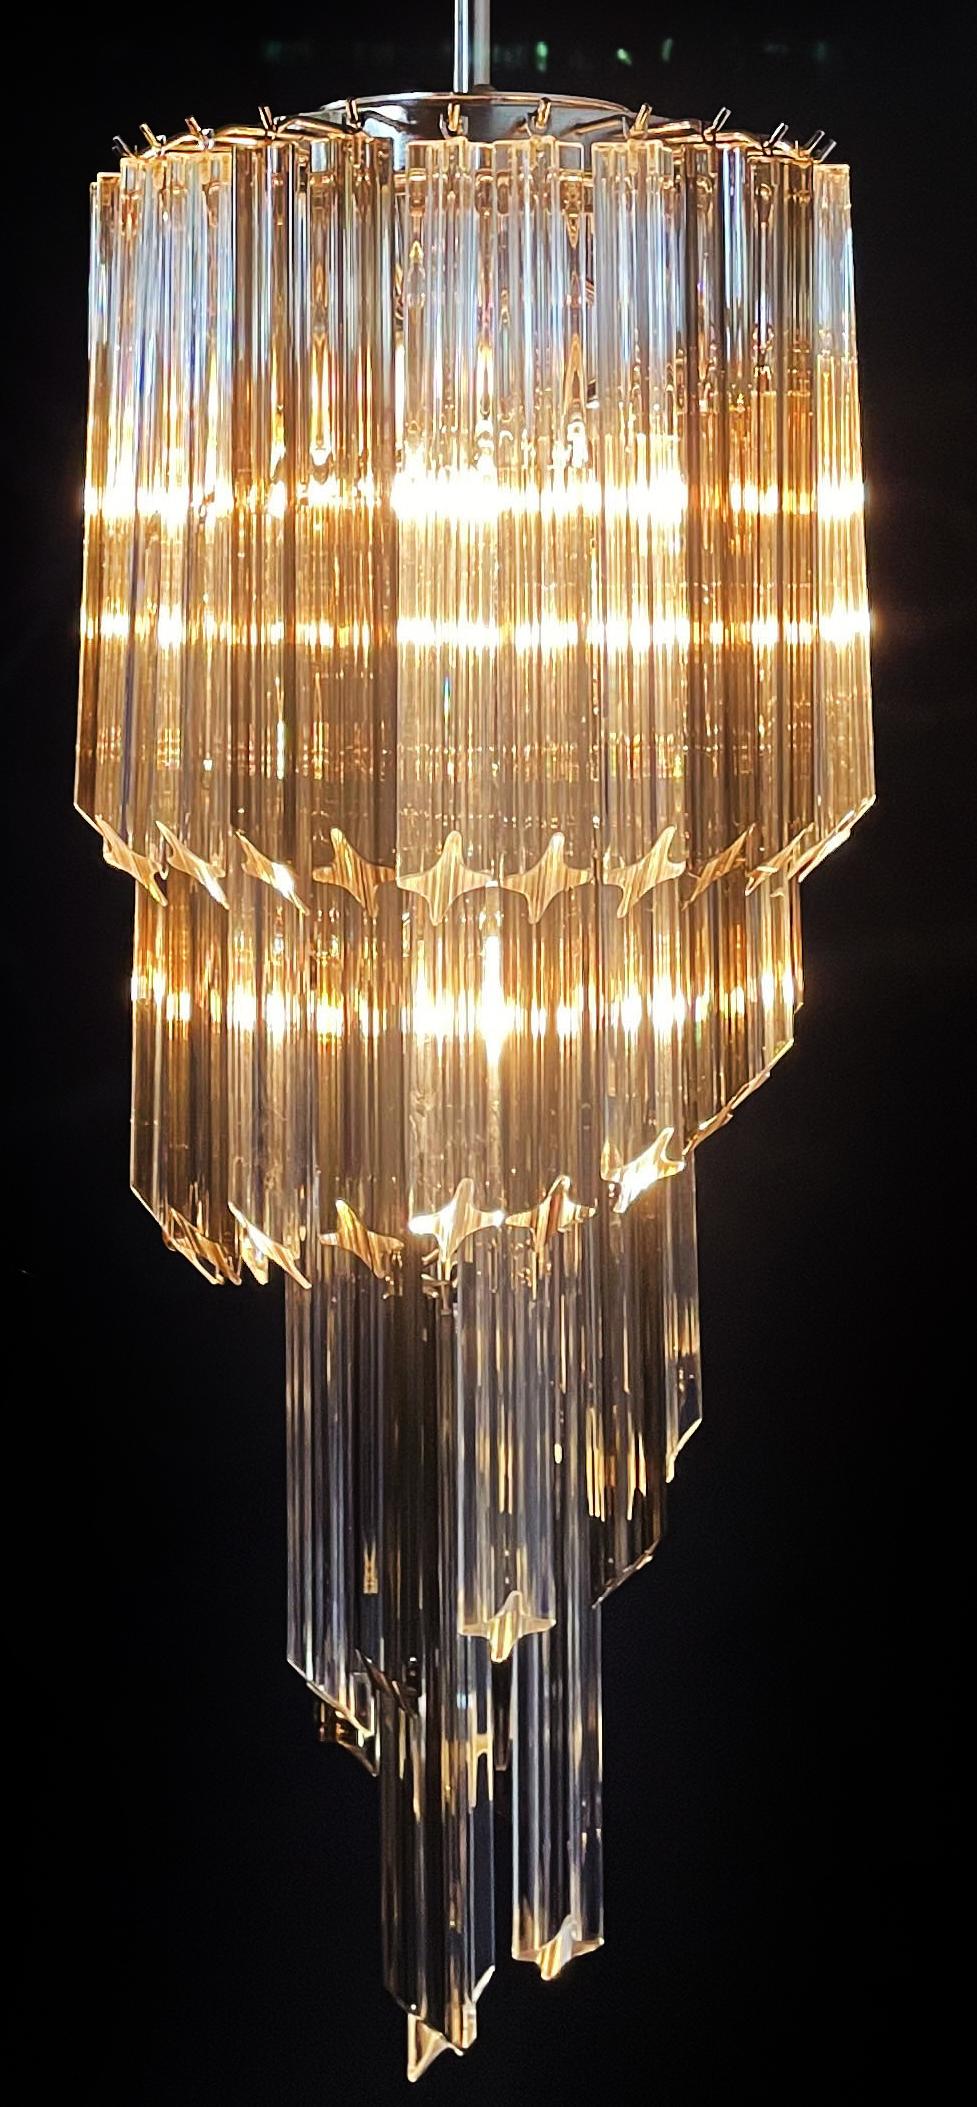 Art Glass Sophisticated Murano Chandelier – 54 quadriedri prisms transparent and smoked For Sale